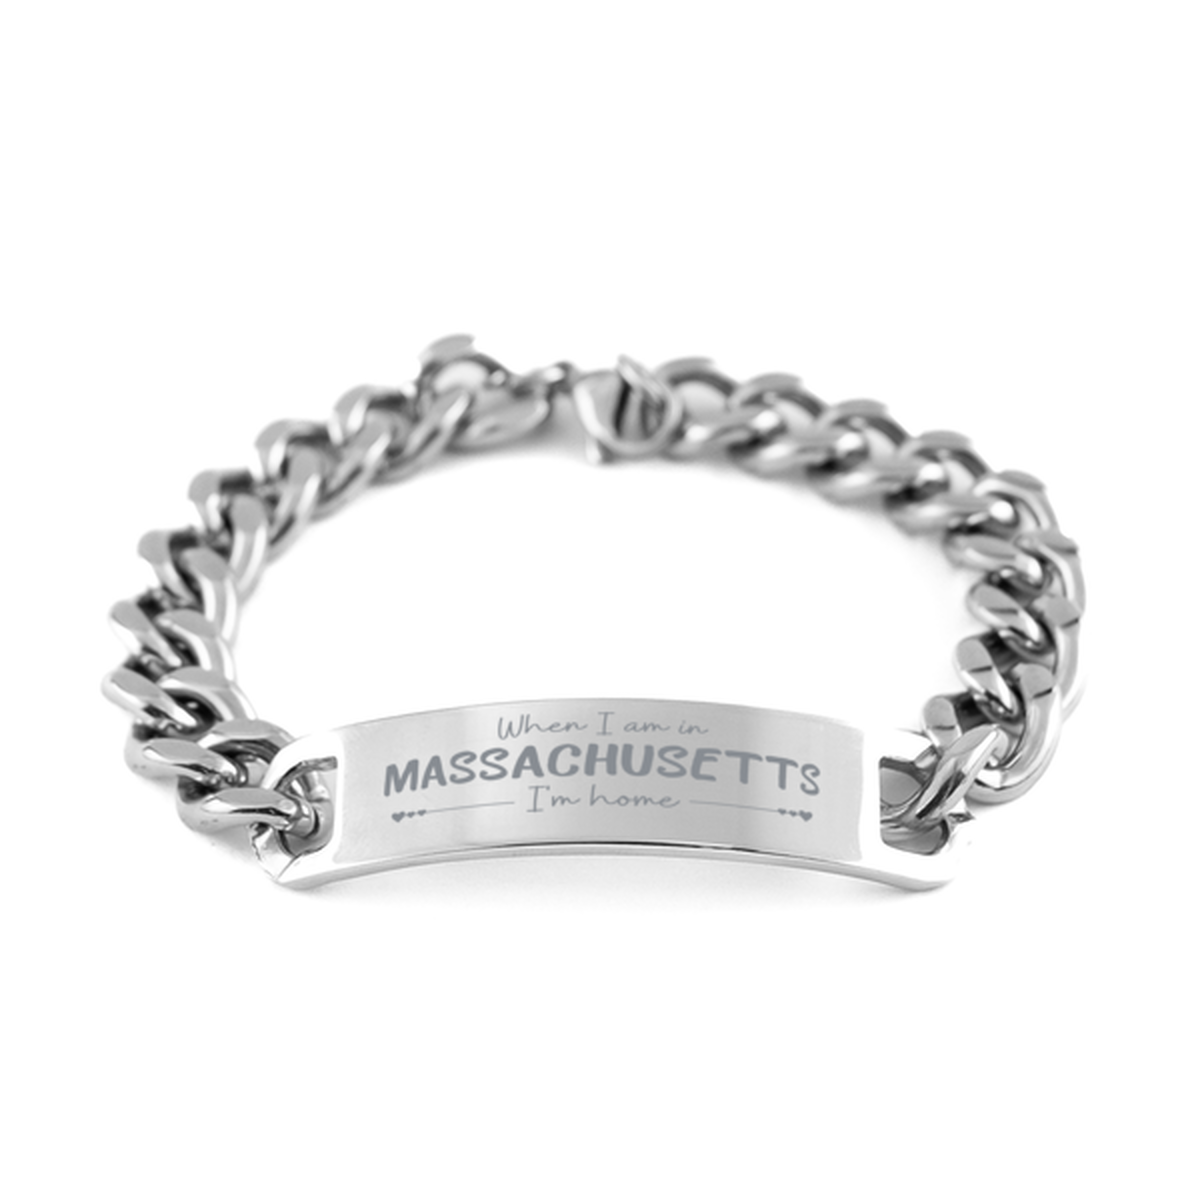 When I am in Massachusetts I'm home Cuban Chain Stainless Steel Bracelet, Cheap Gifts For Massachusetts, State Massachusetts Birthday Gifts for Friends Coworker